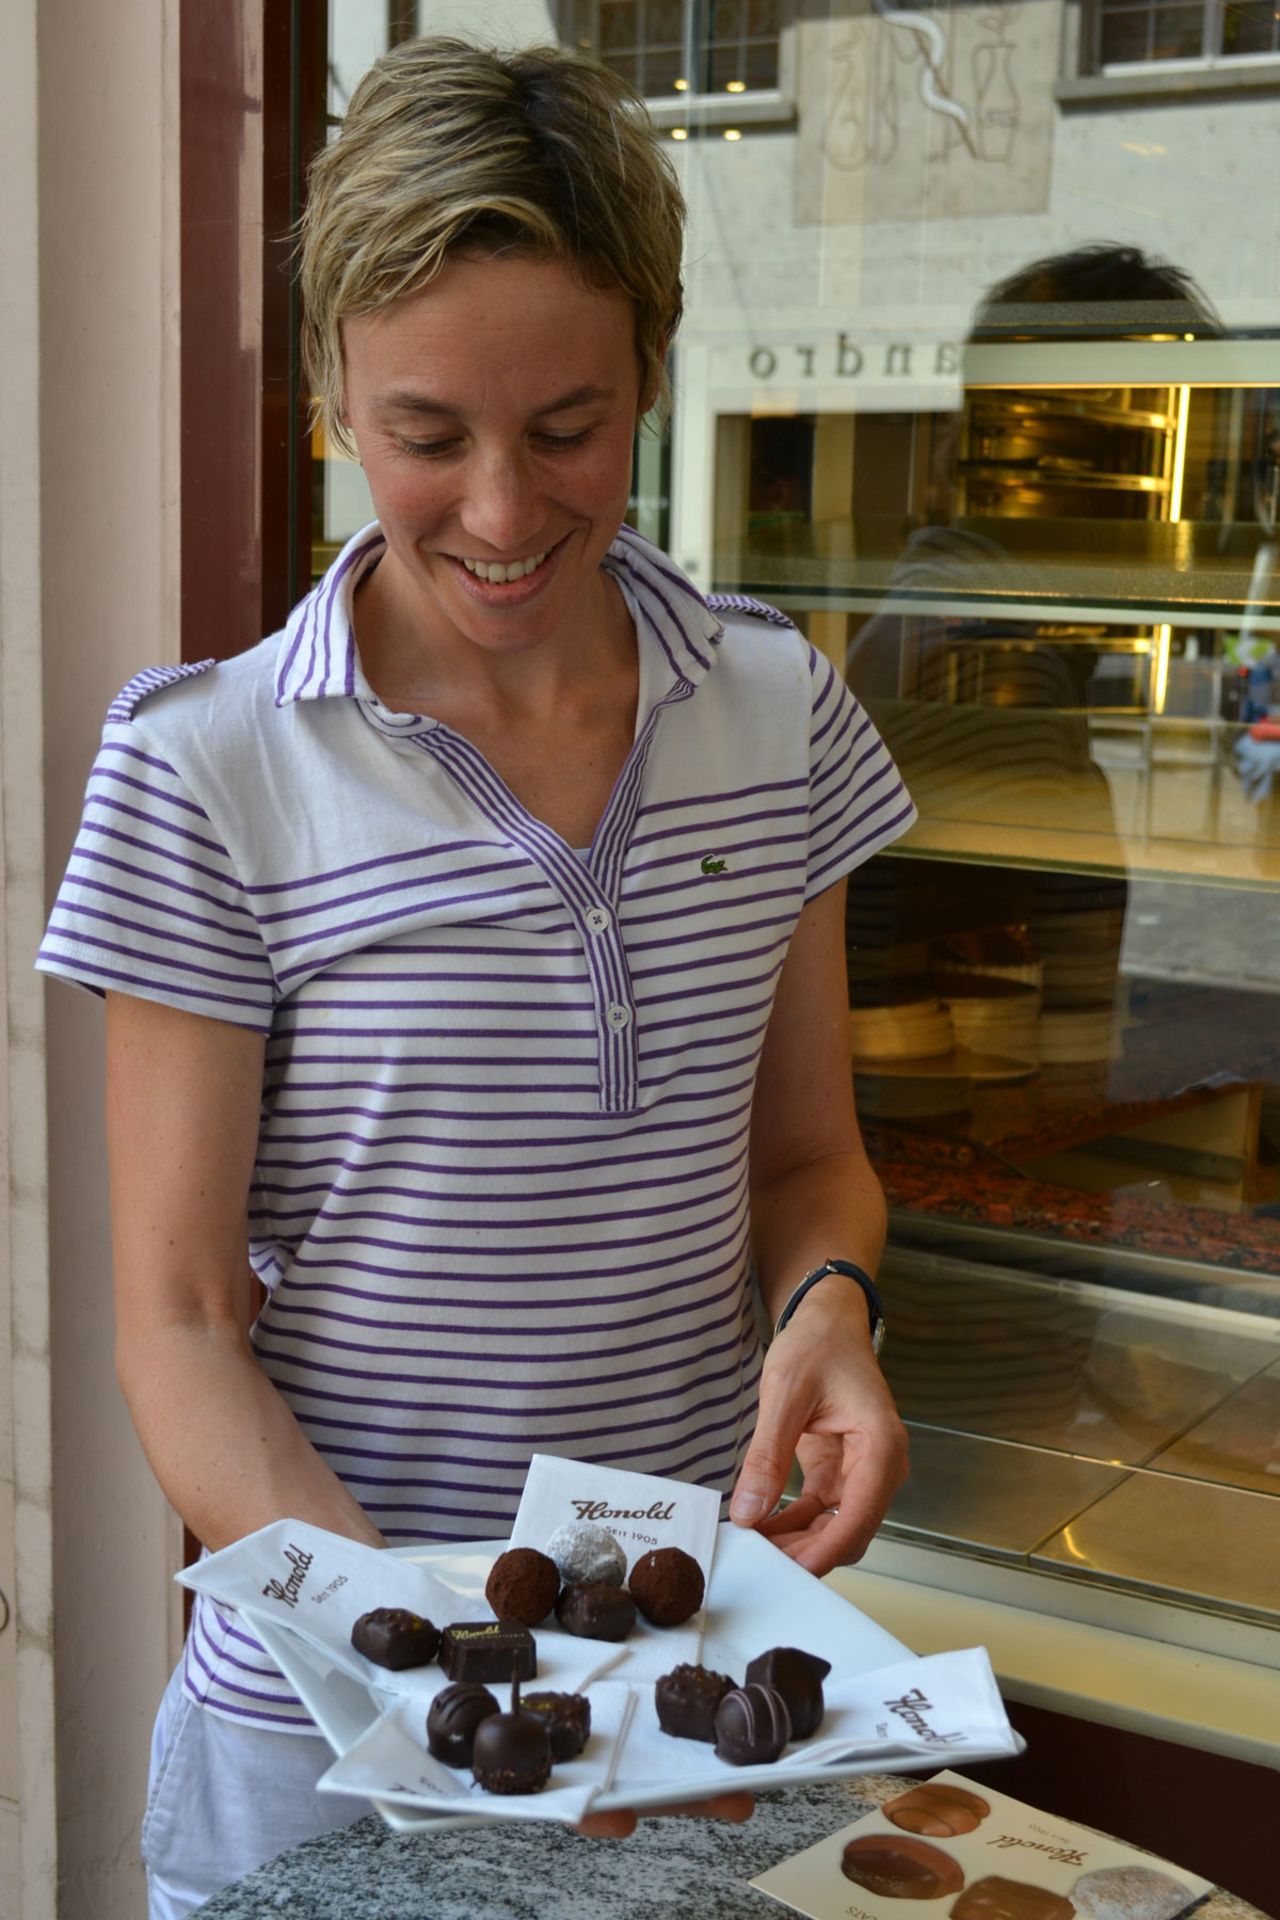 New Yorker Kerrin Roussett has lived in Zurich for six years and been running chocolate tours since 2011.